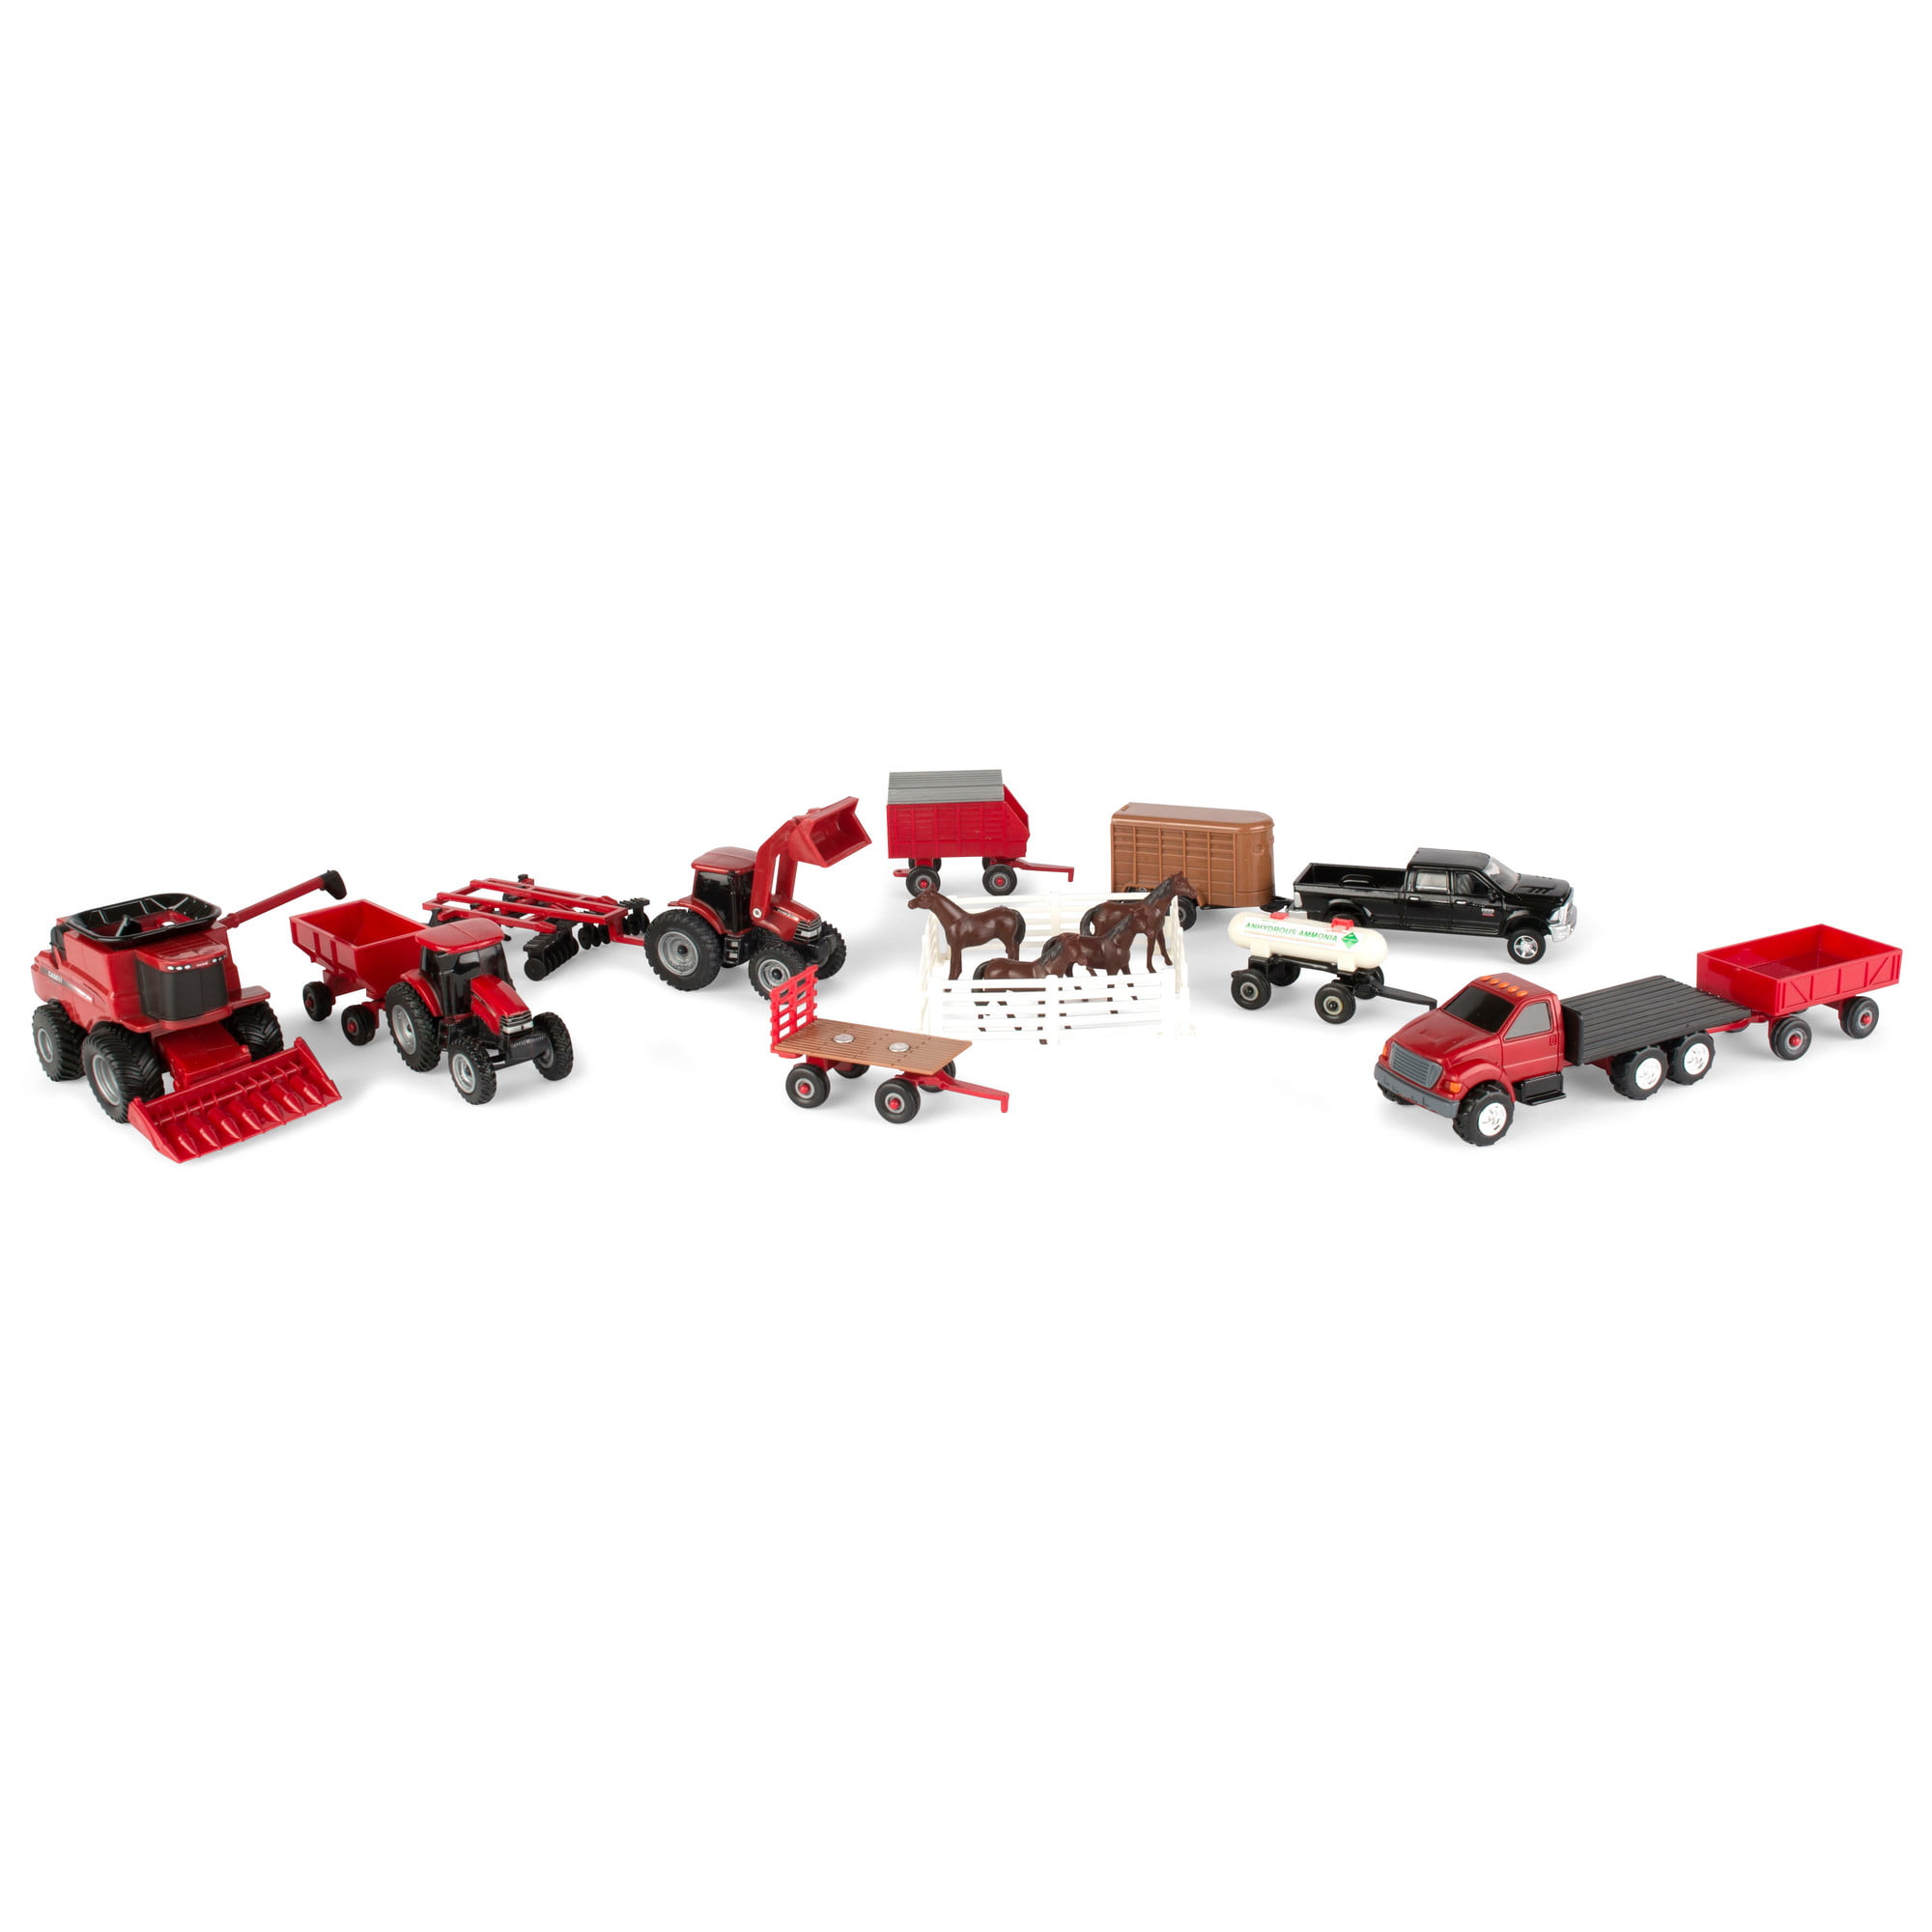 20-Piece Tomy Case IH 1:64 Scale Toy Tractor Set w/ Animals & Accessories $23 + Free Shipping w/ Walmart+ or $35+